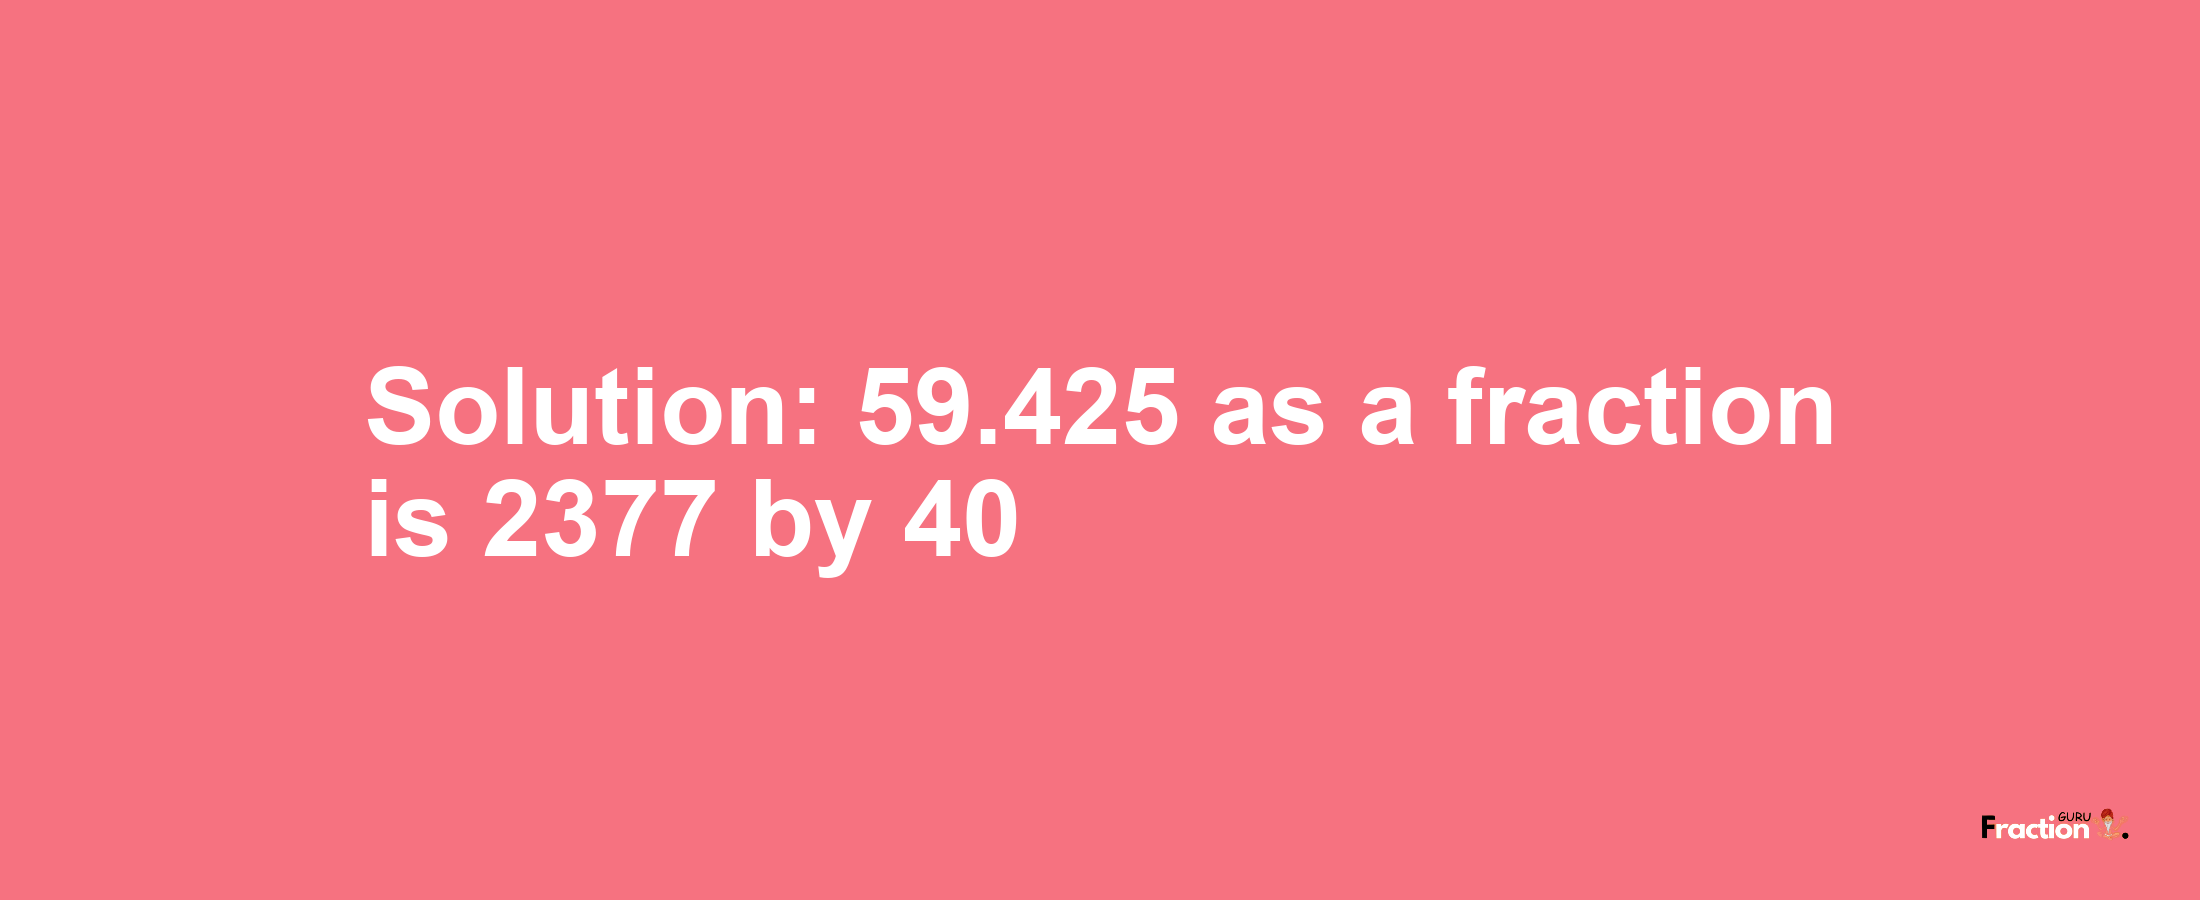 Solution:59.425 as a fraction is 2377/40